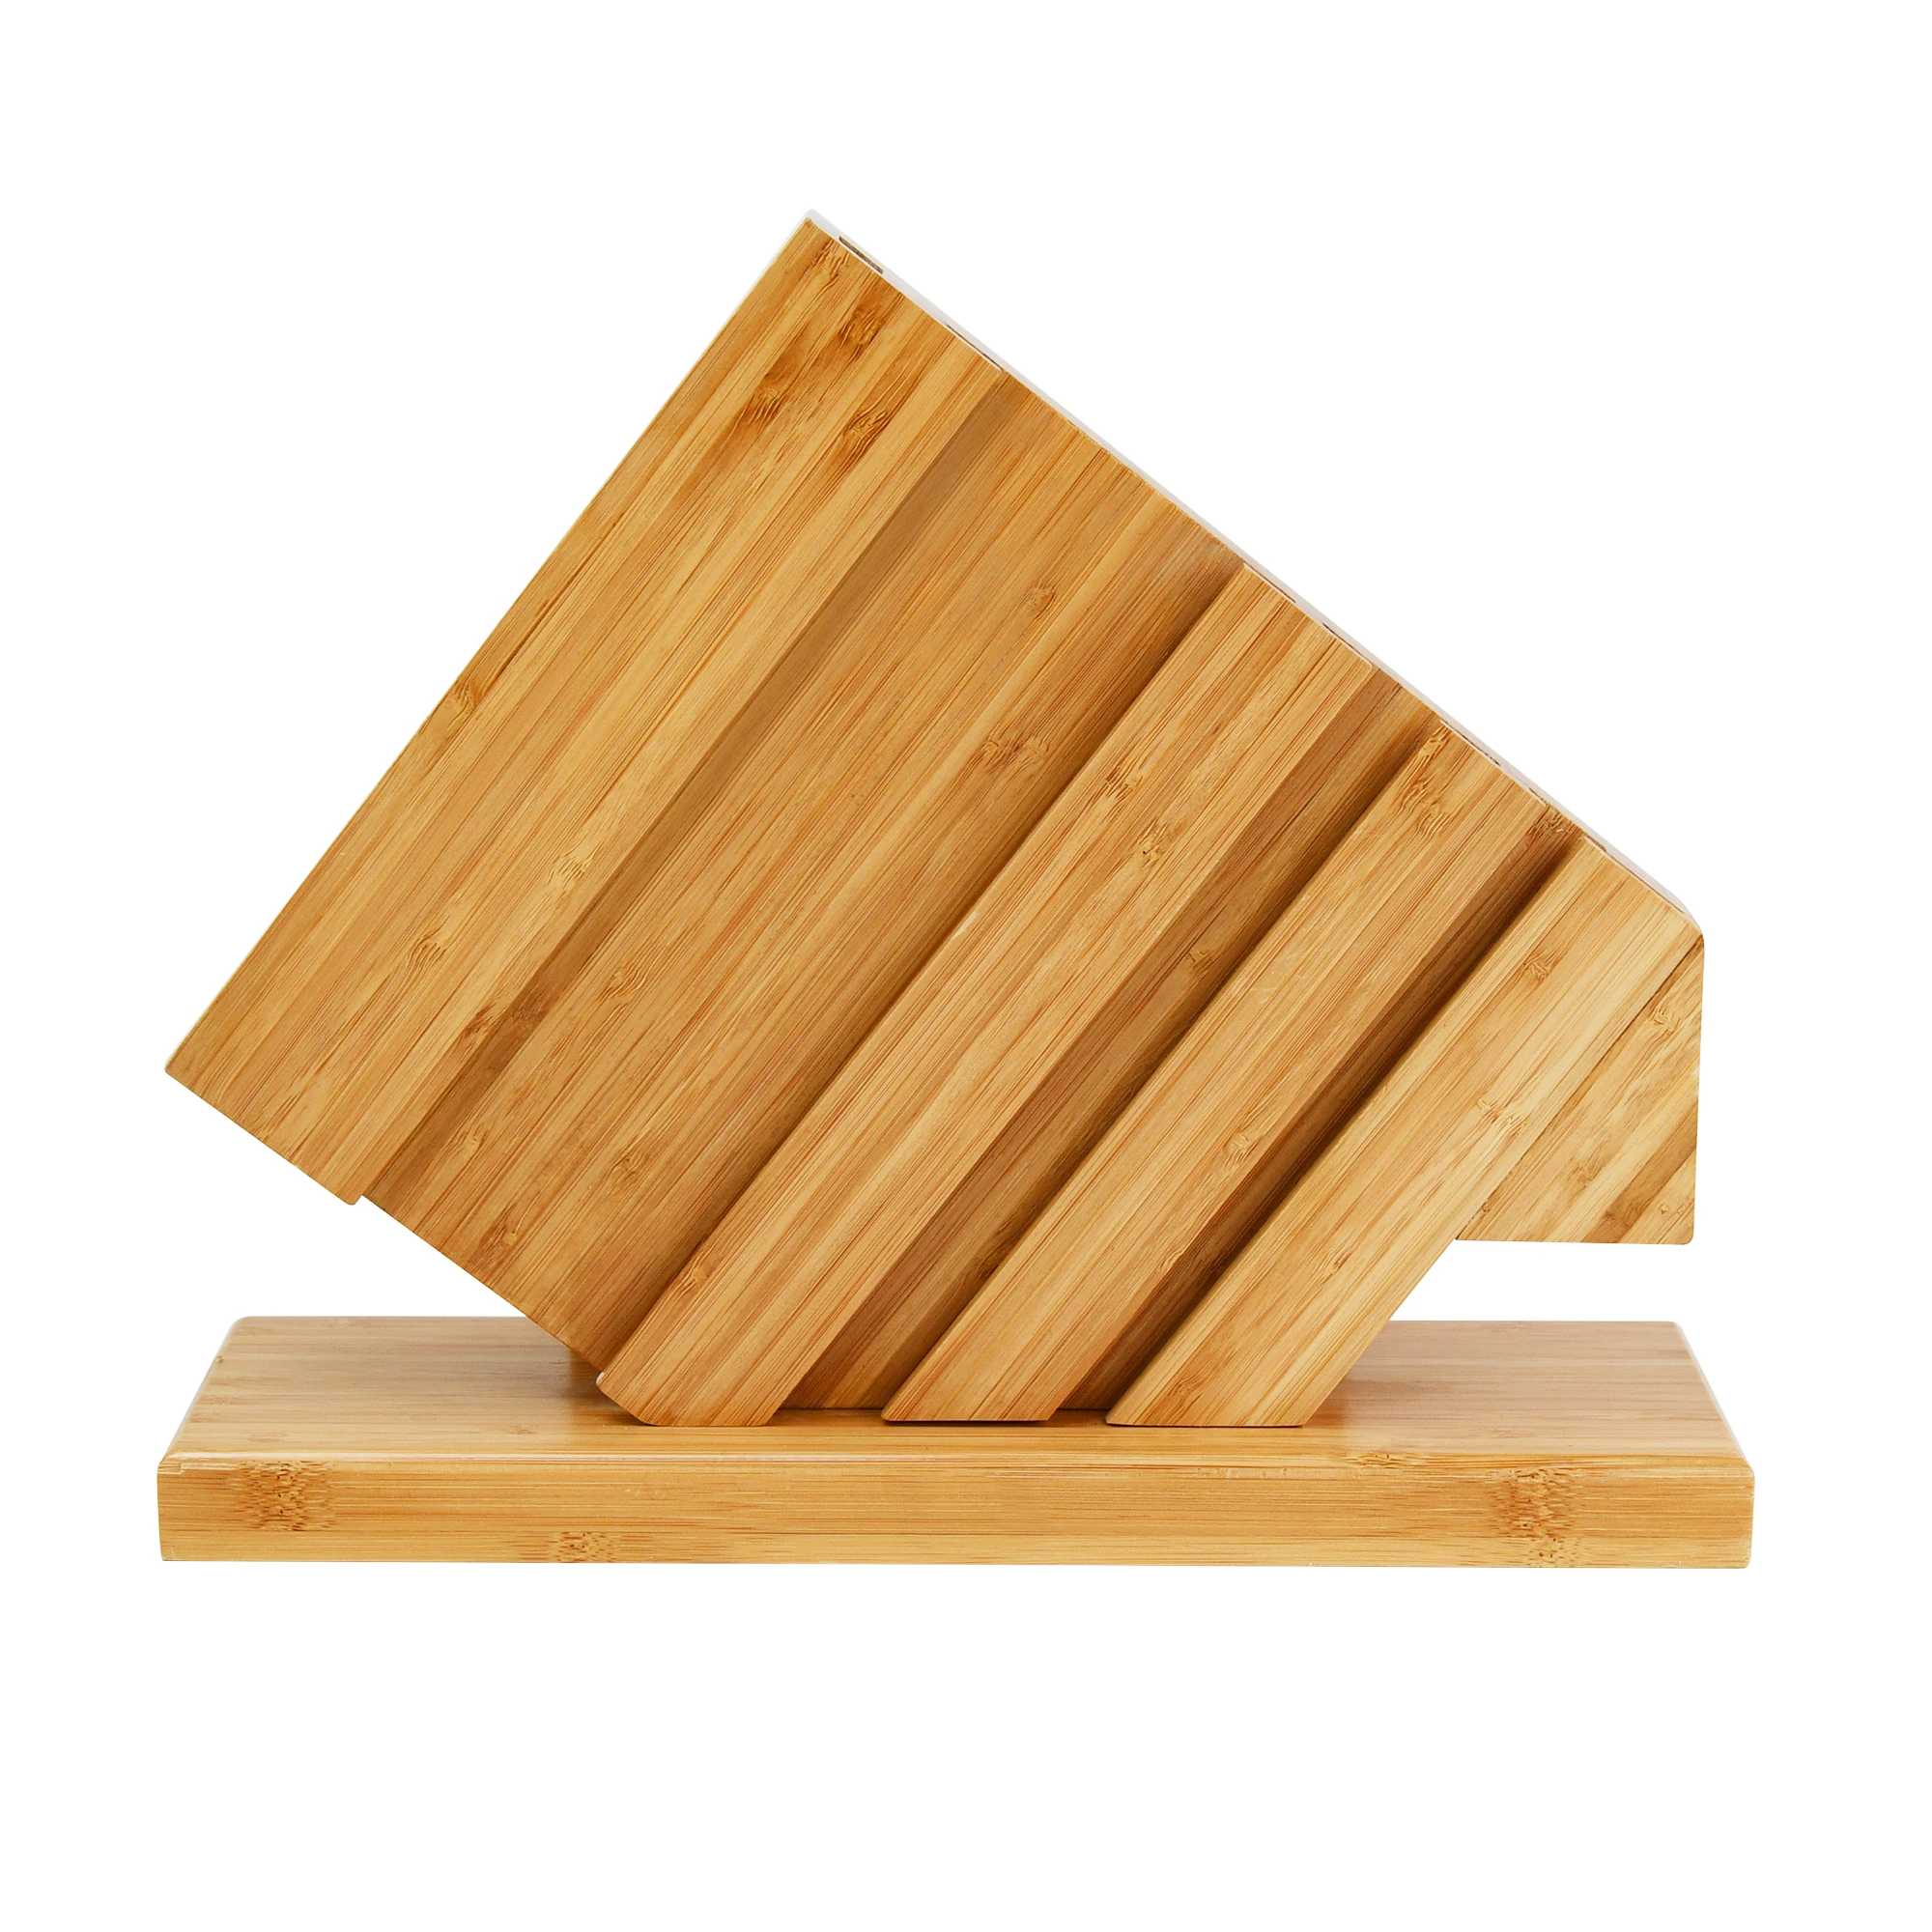 Bamboo Large Magnetic Knife Block Holder Powerful Kitchen Organizer For Storage With Cutting Board